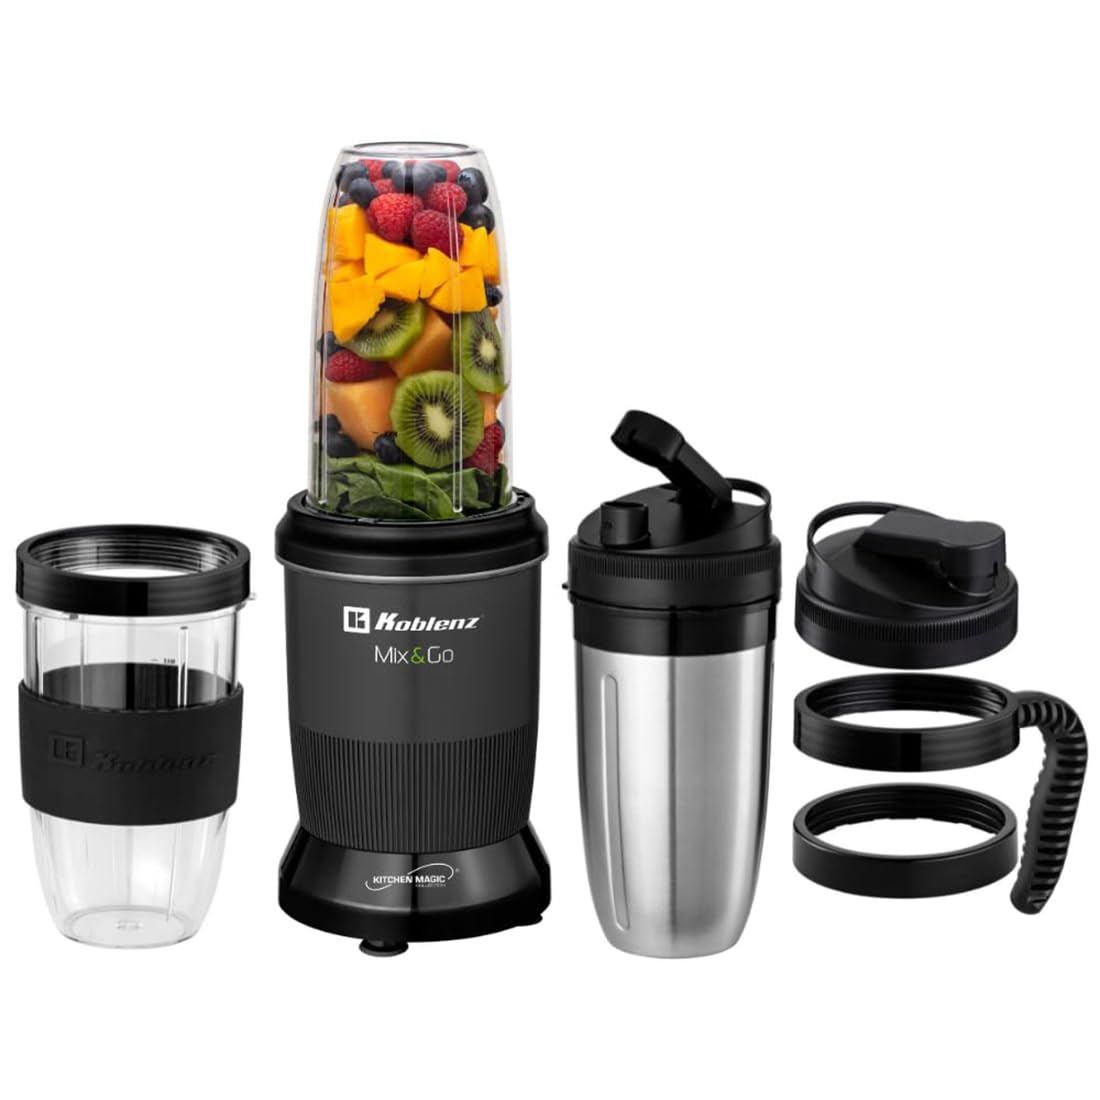 Koblenz Mix&Go Portable Blender, Personal Size Blender for Shakes and Smoothies, 1000-watt Motor, Stainless Steel Blades with 6 Arms, 12 Accessory Kit, Black